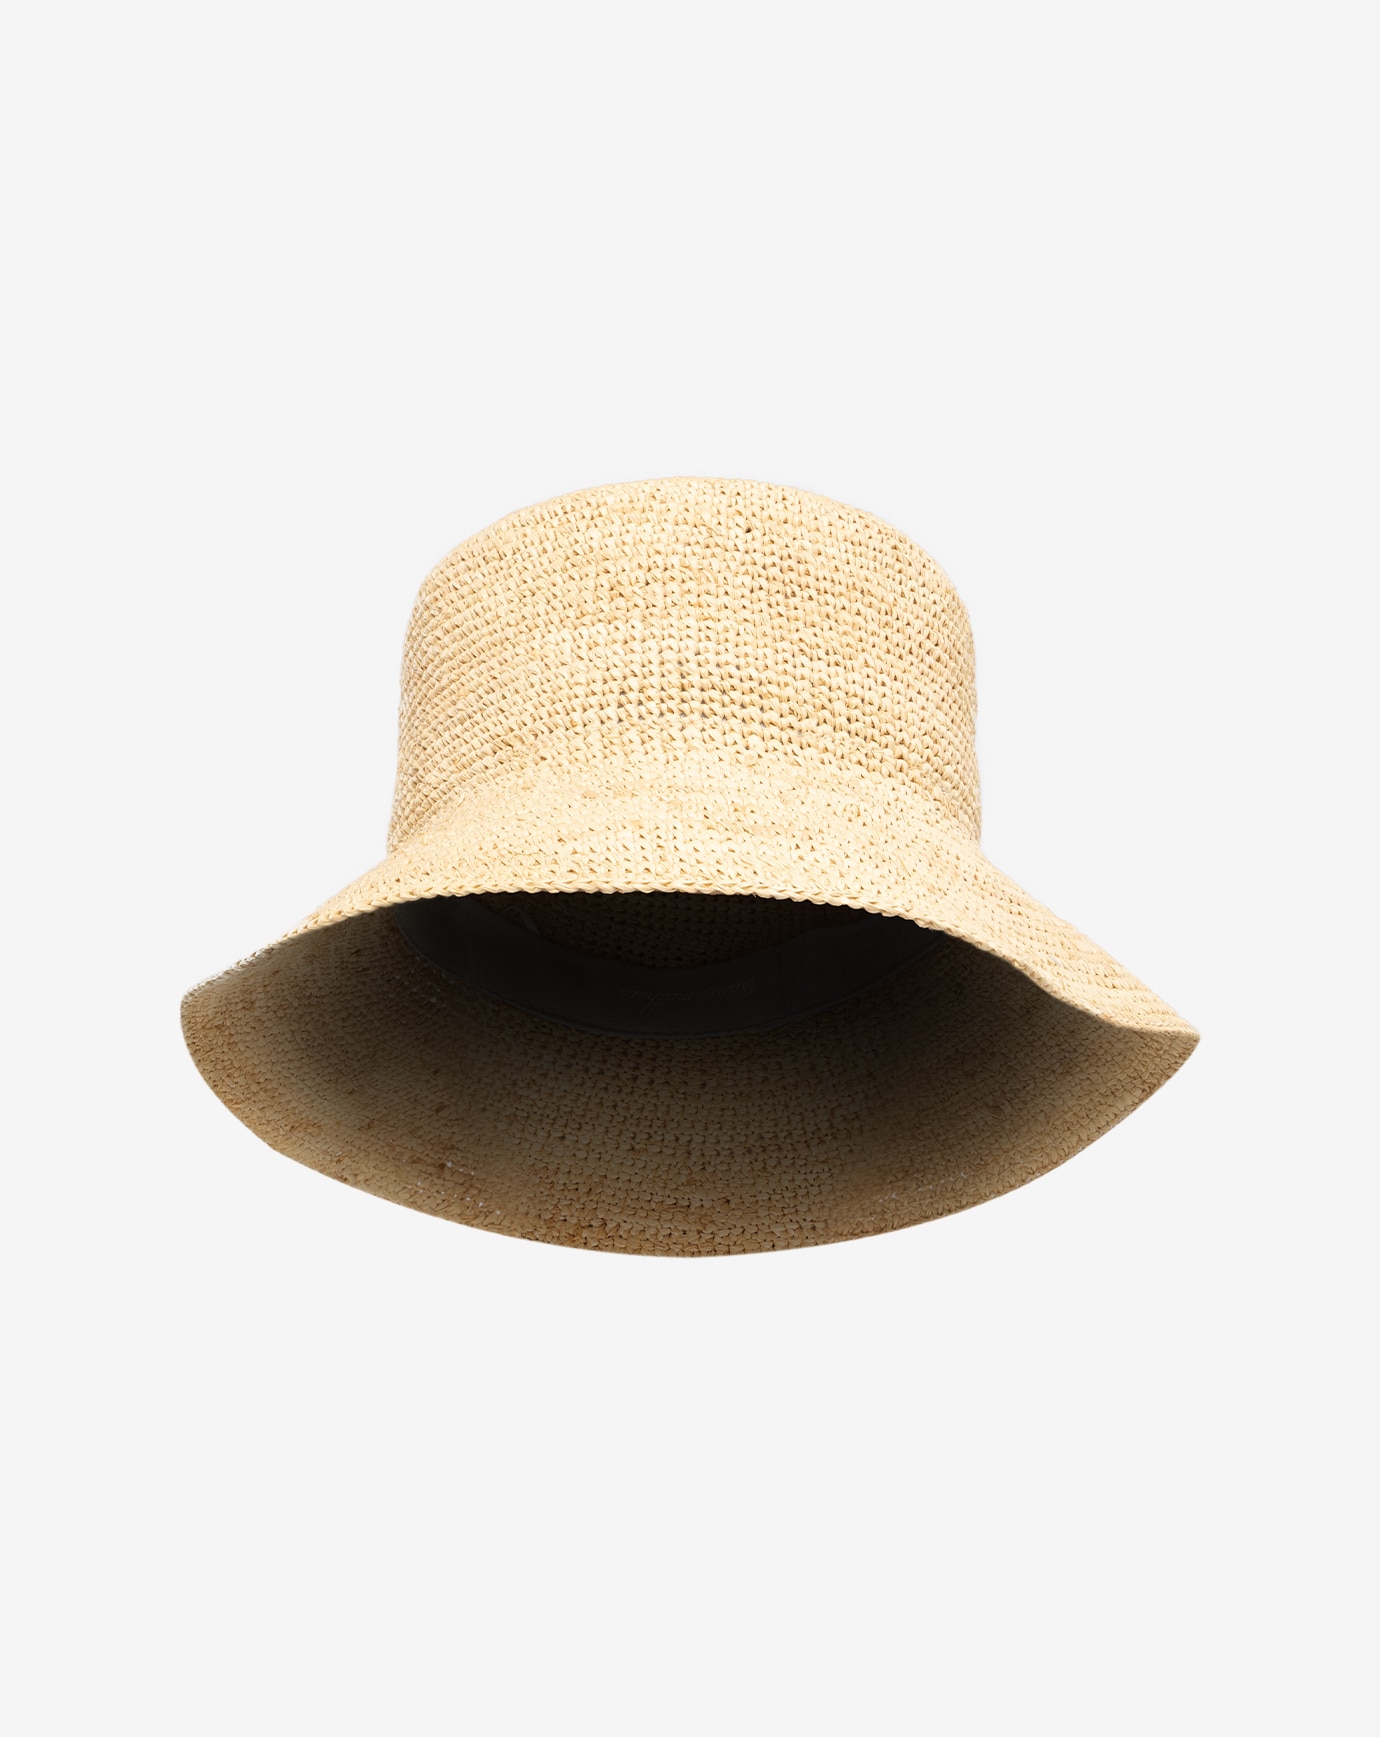 Related Product - SUMMER VACATION WOVEN HAT